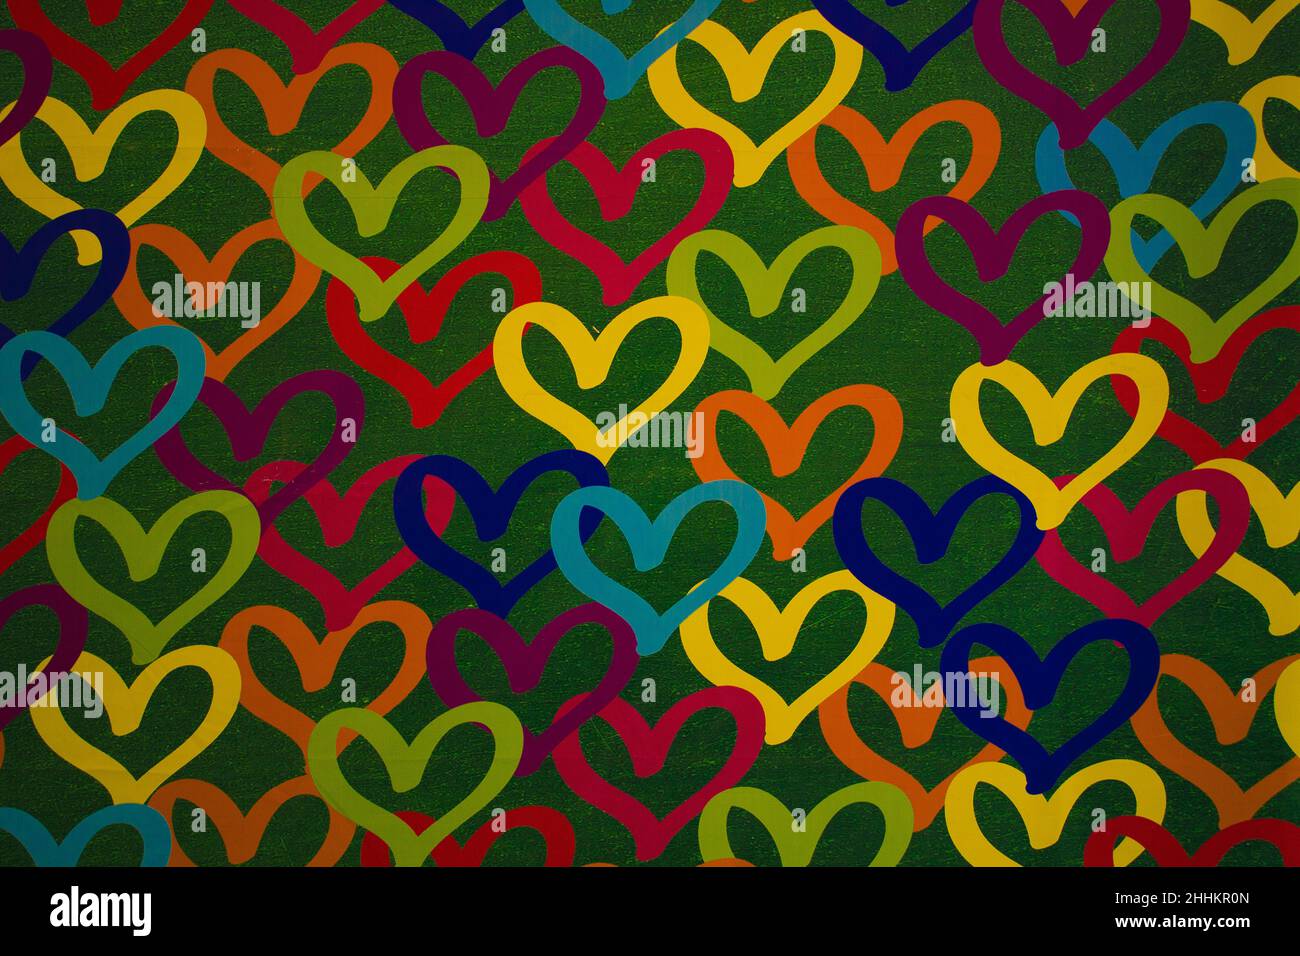 Valentine's day concept with colorful heart patterns background. Colorful love concept idea with lots of hearts on the wall illustration. Stock Photo